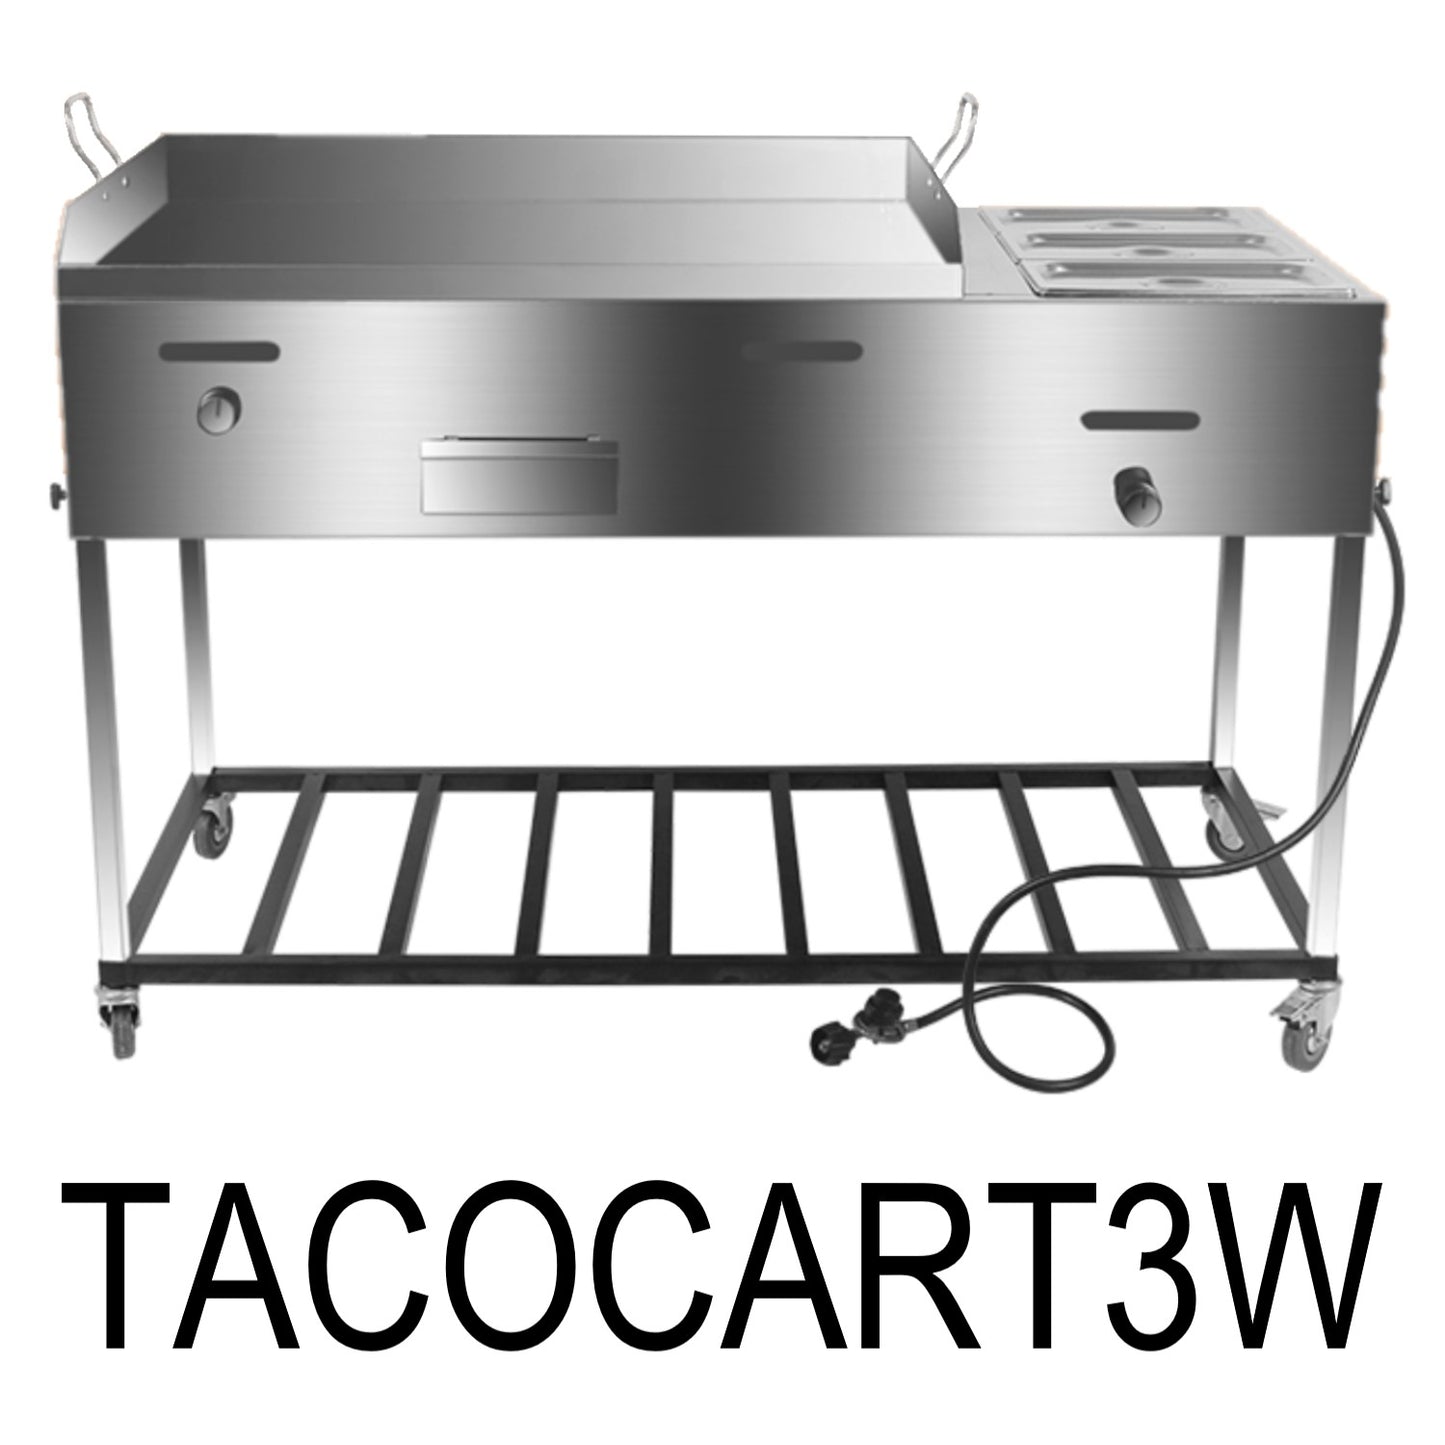 51" Stainless Steel Taco Carts With 3 Food Warmers